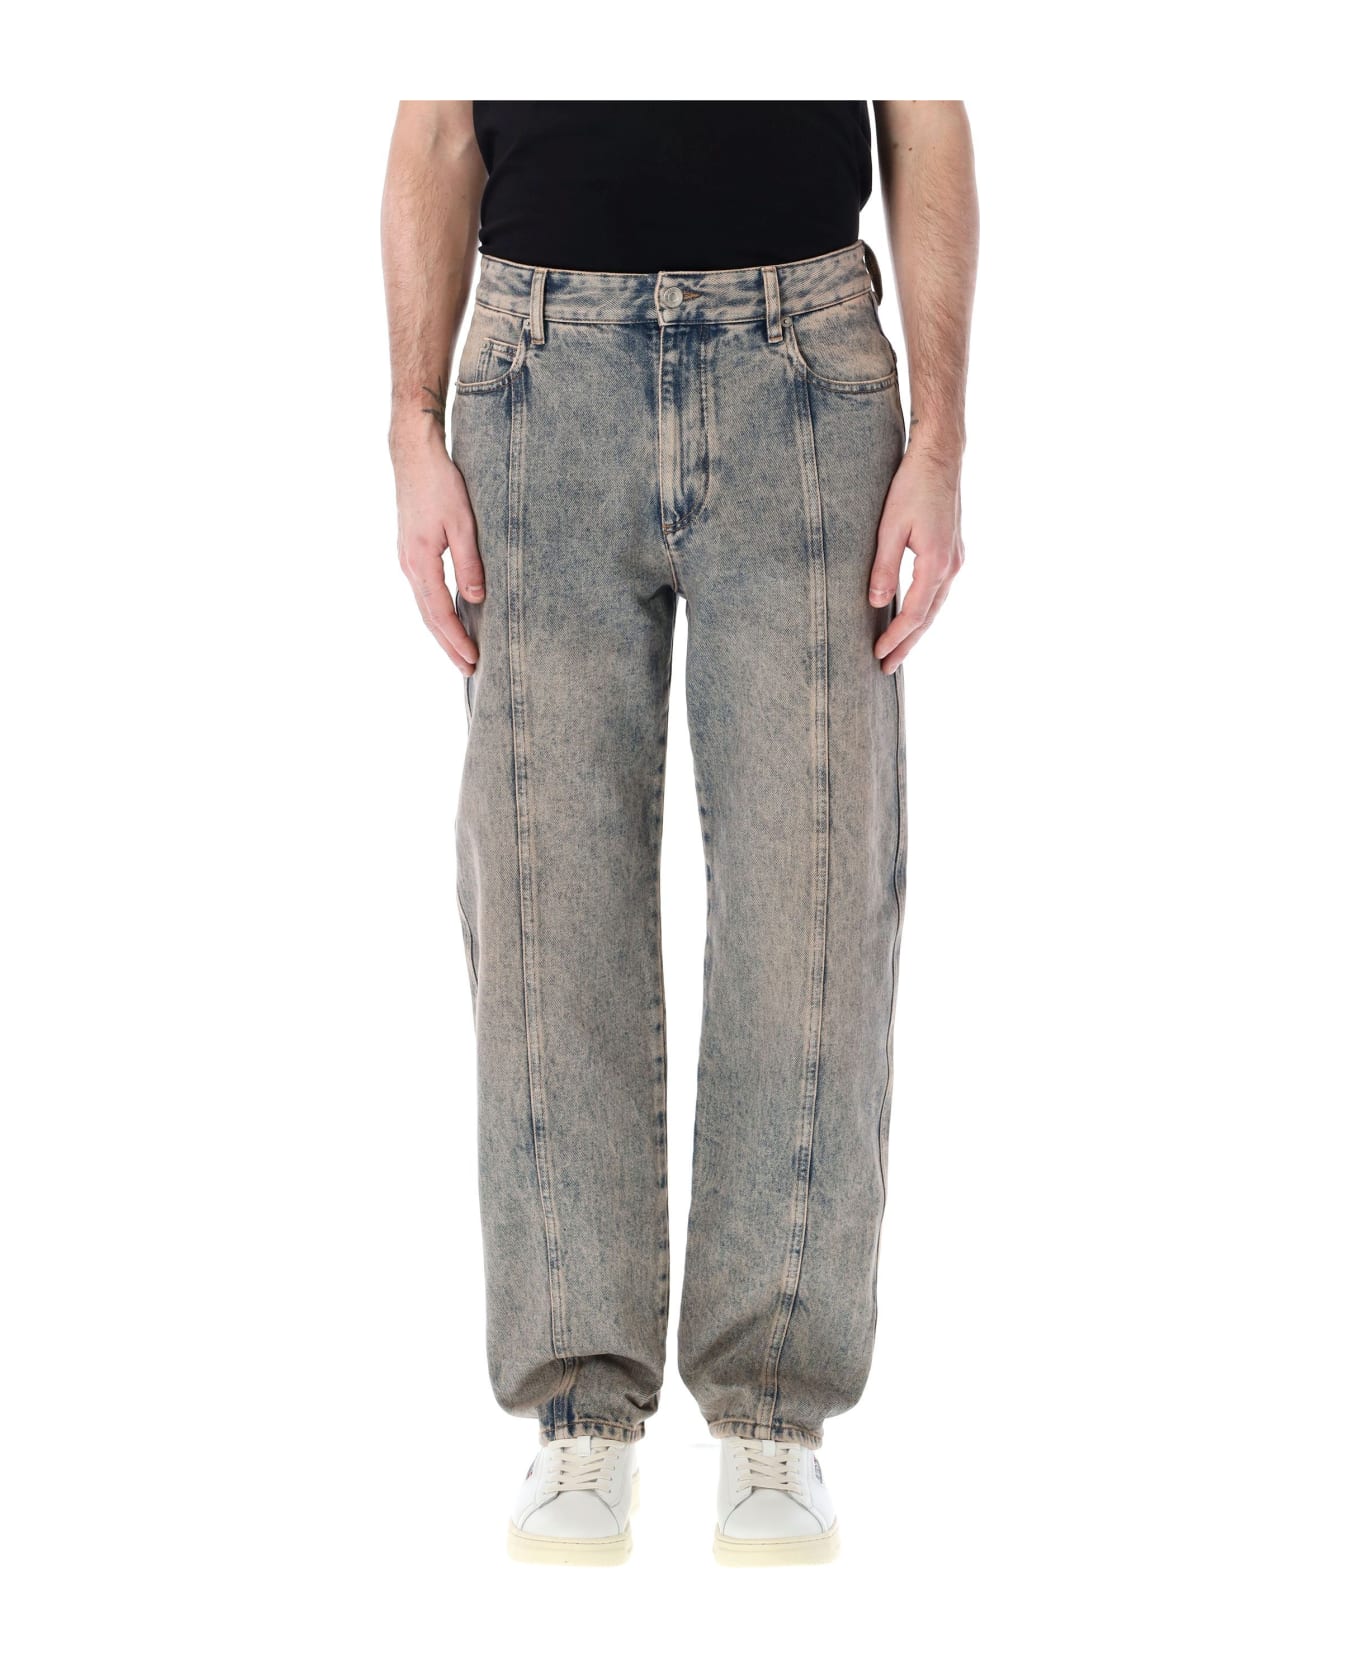 Isabel Marant Jimmy Jeans - PINKY WASH